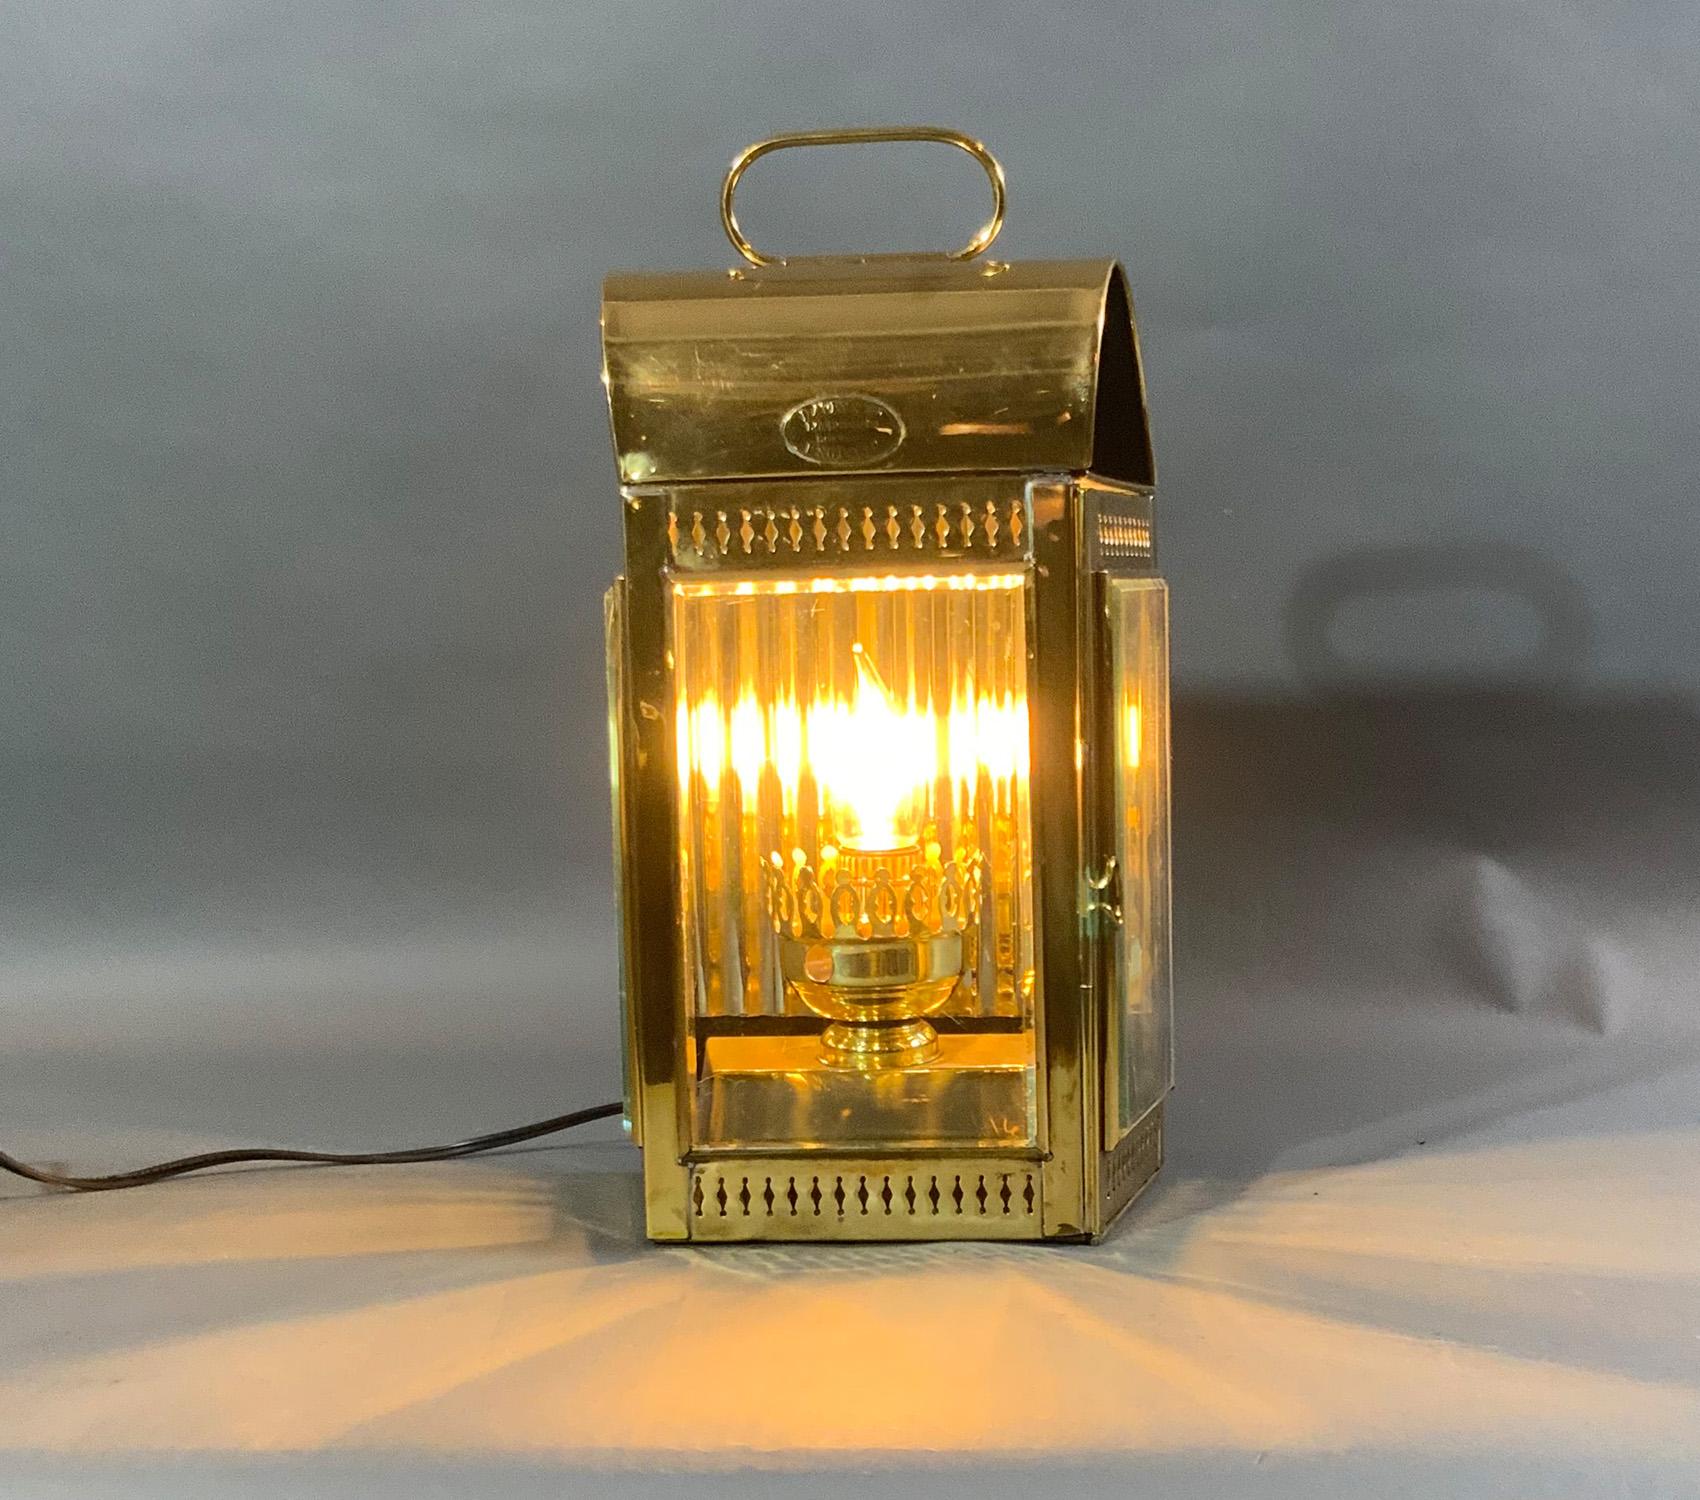 Brass yacht cabin lantern with highly polished finish. Three glass panes and one hinged door. The oil tank has been fitted with an electric socket recently wired for home use. Very nice condition.

Weight: 6 LBS
Overall Dimensions: 14” H x 9